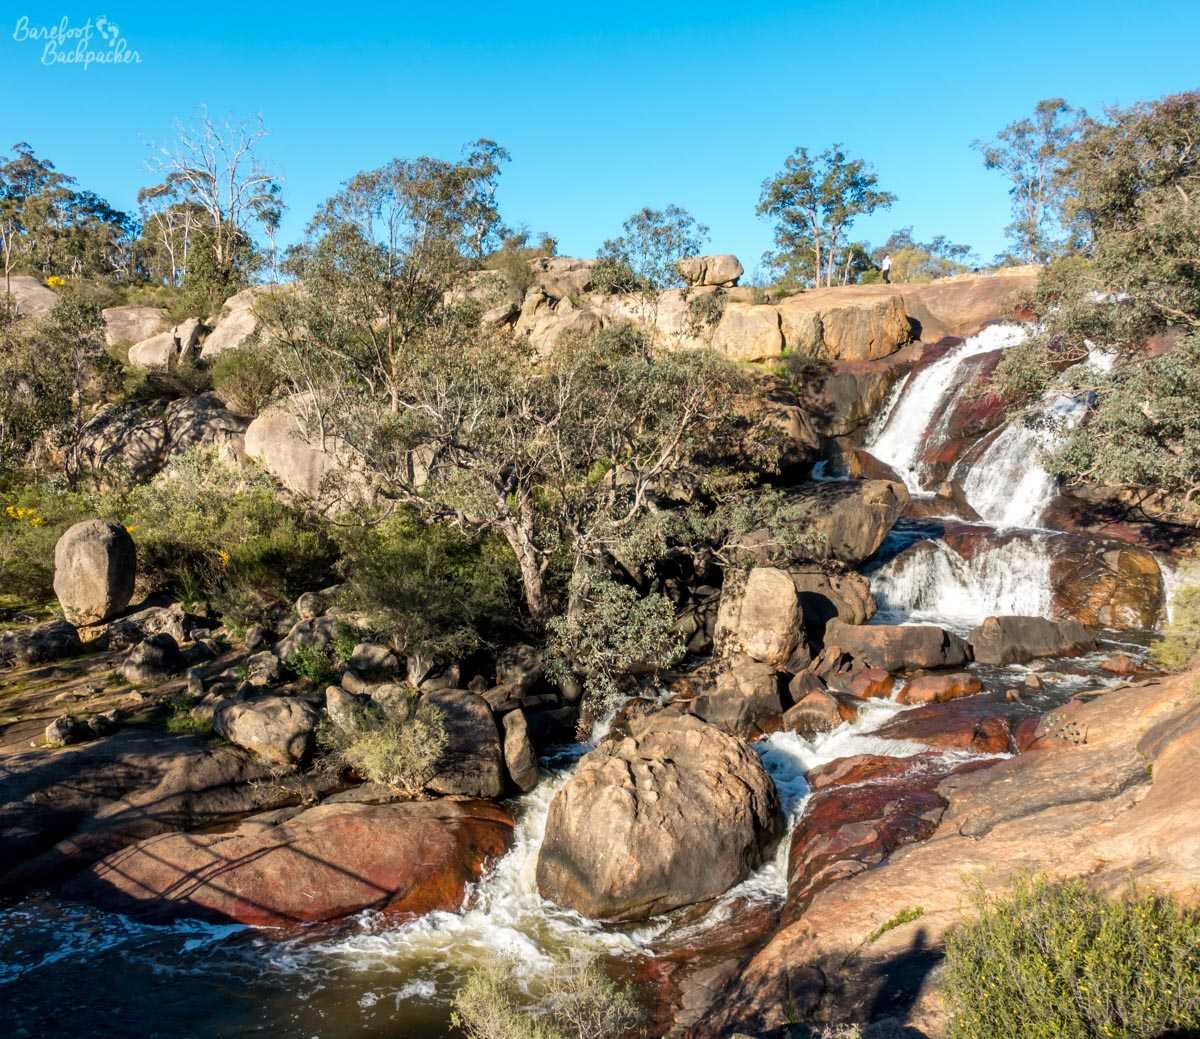 Small cascade of water over large boulders in John Forrest National Park.